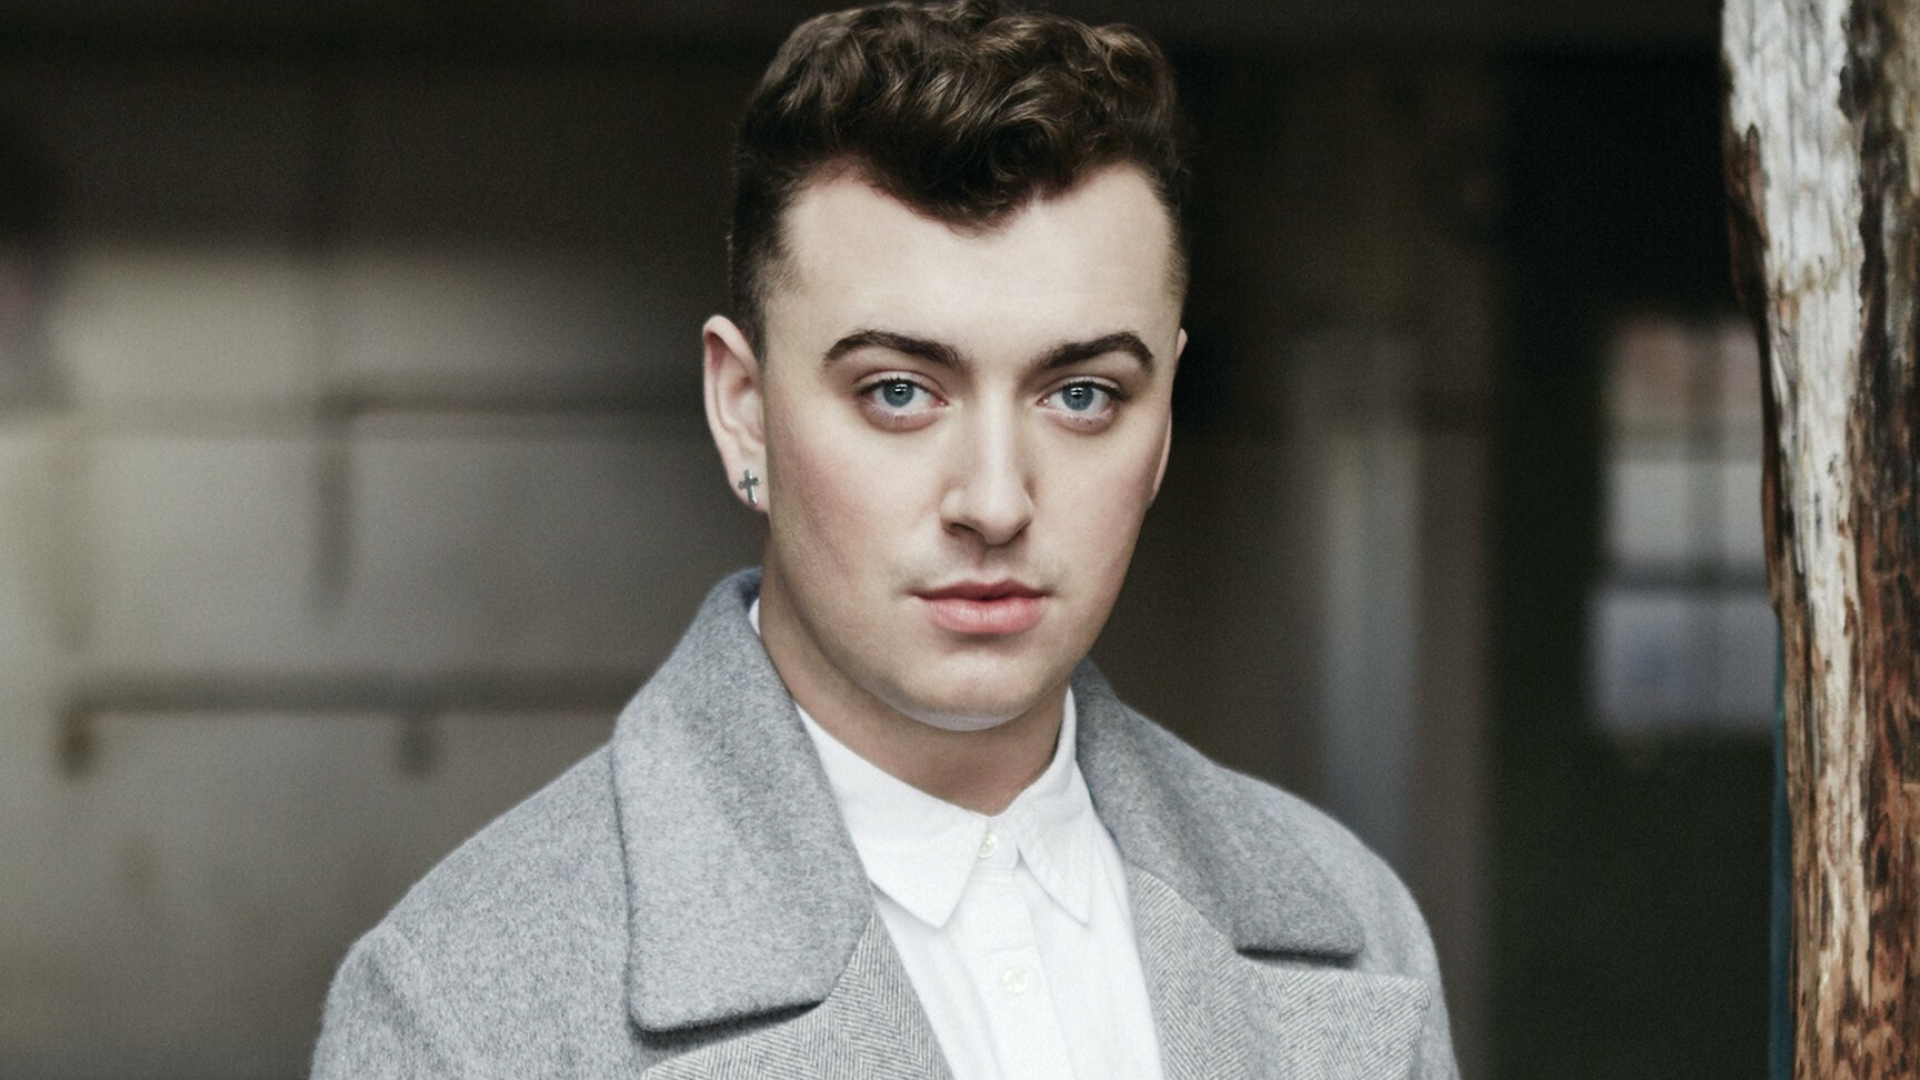 Sam Smith: "To Die For" was released through Capitol Records on 14 February 2020. 1920x1080 Full HD Wallpaper.